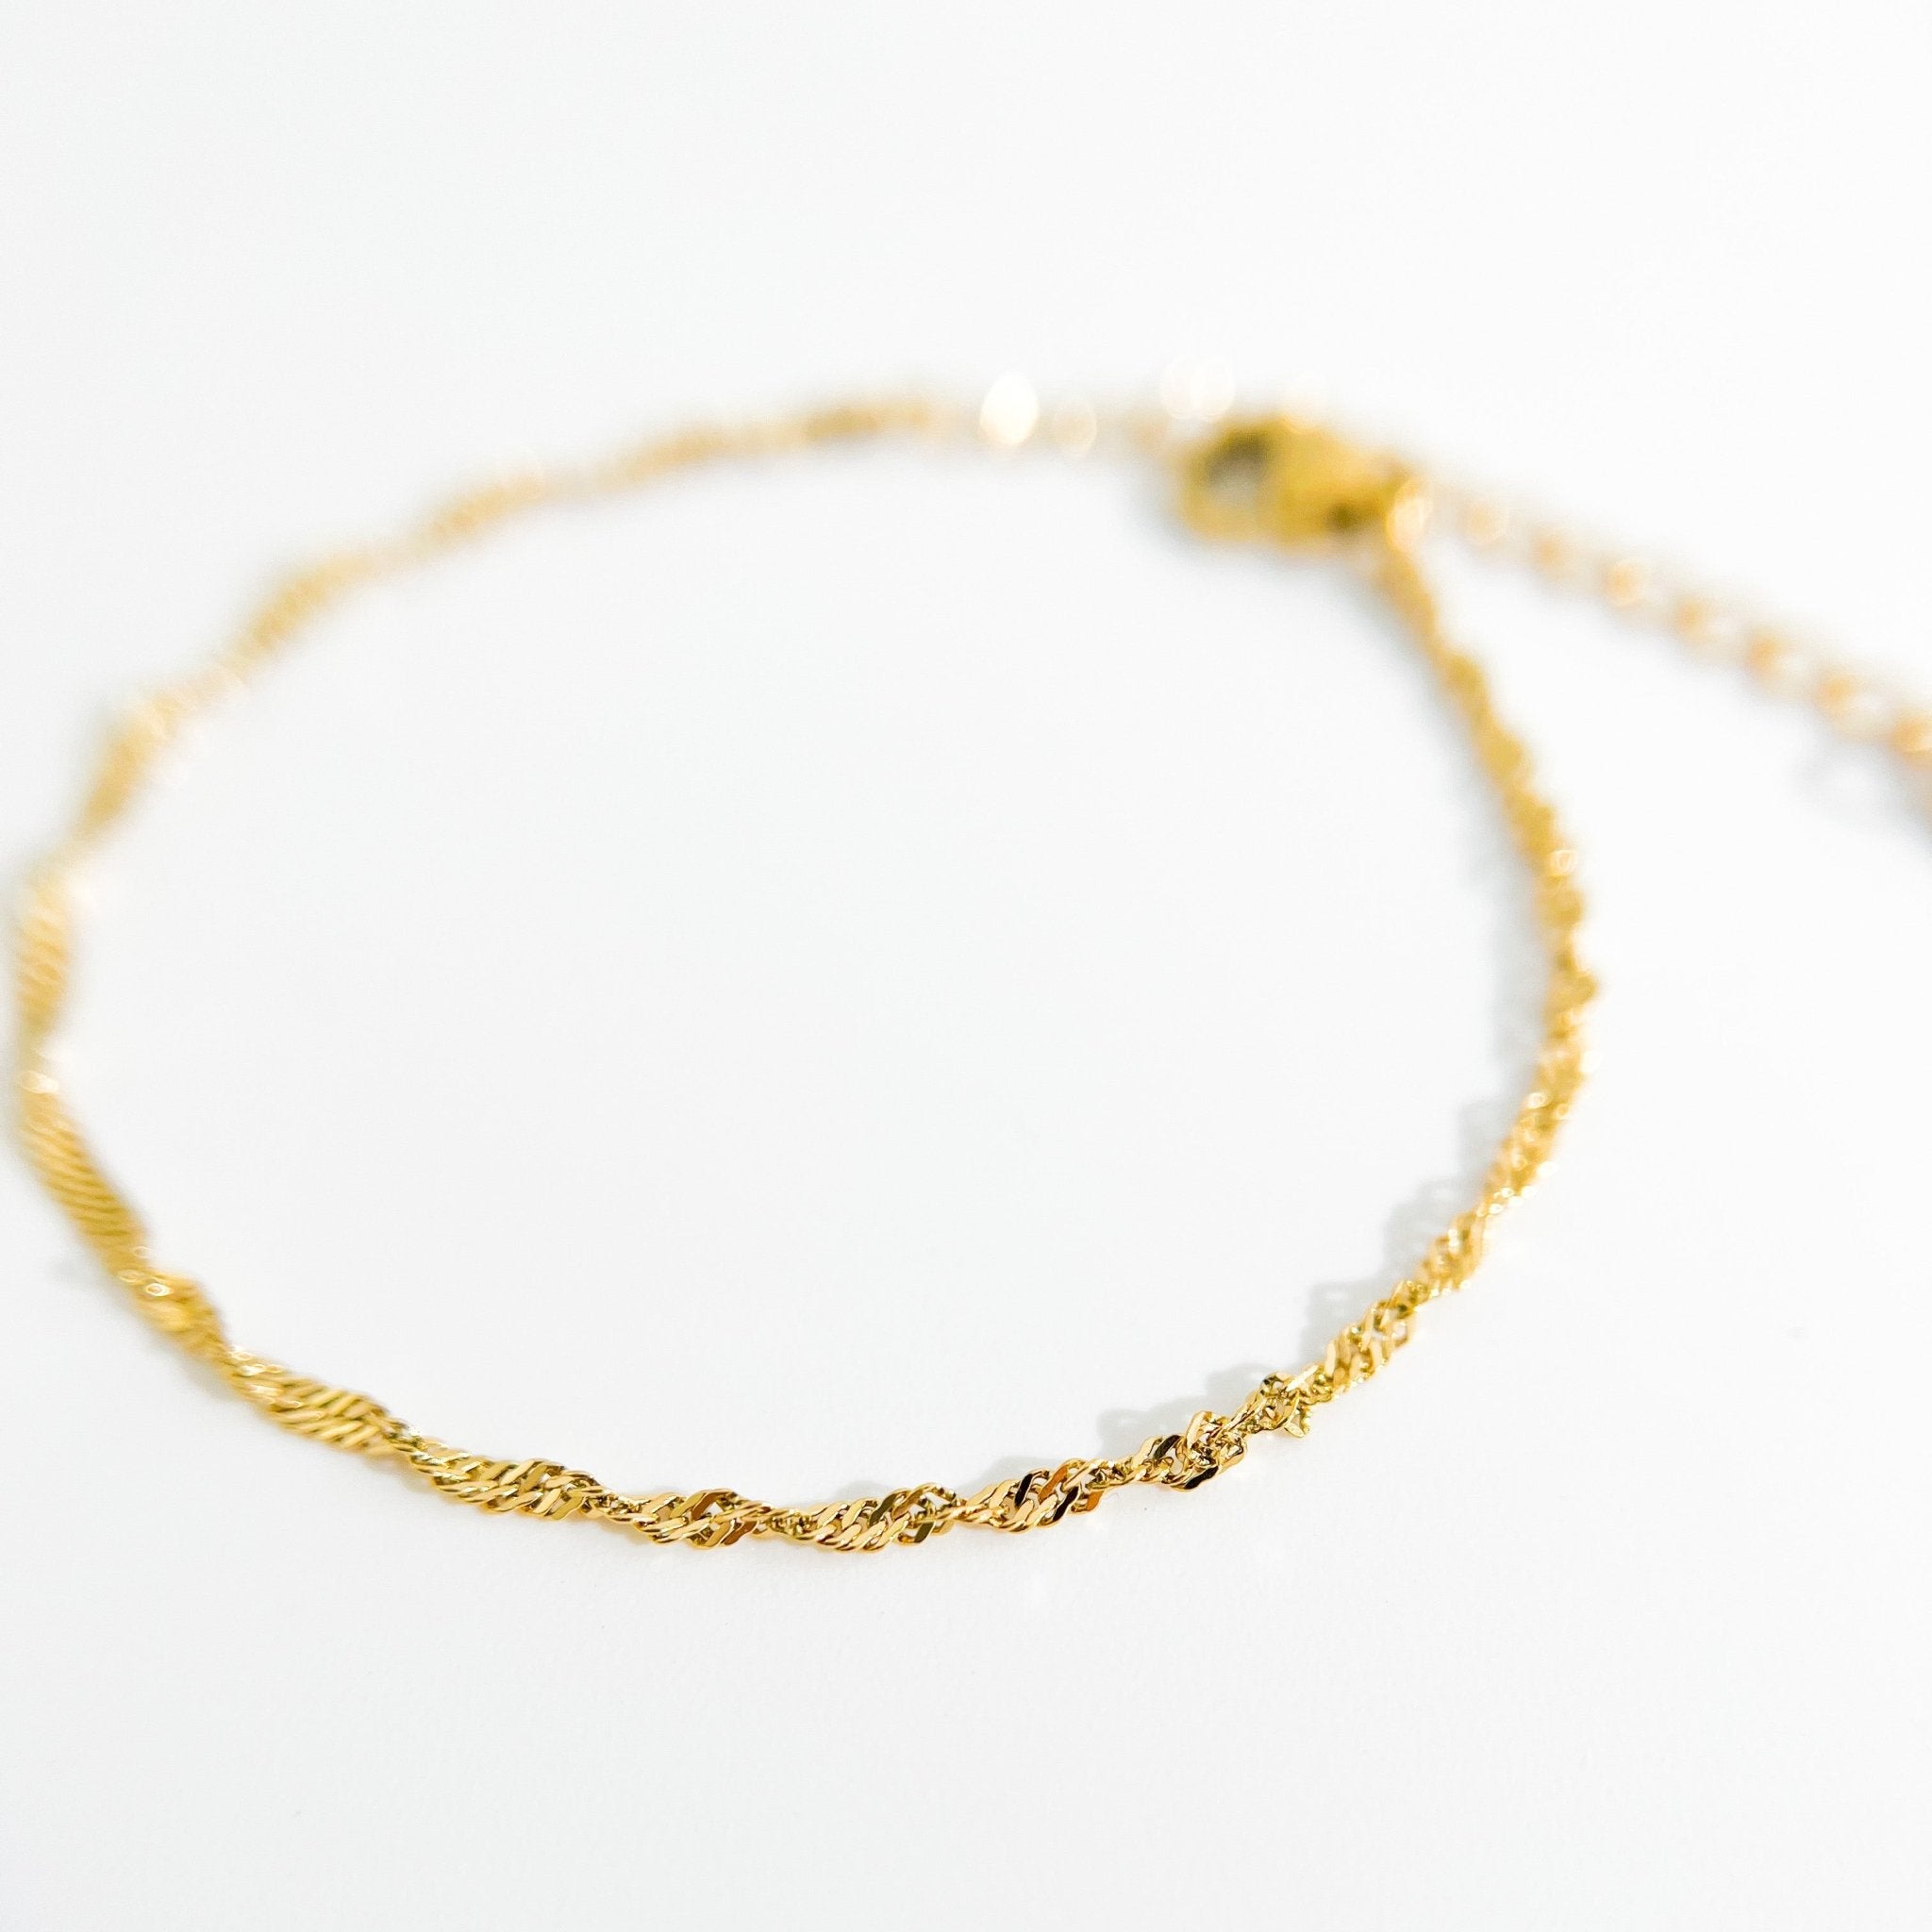 Felicia Bracelet in Gold - Flaire & Co.